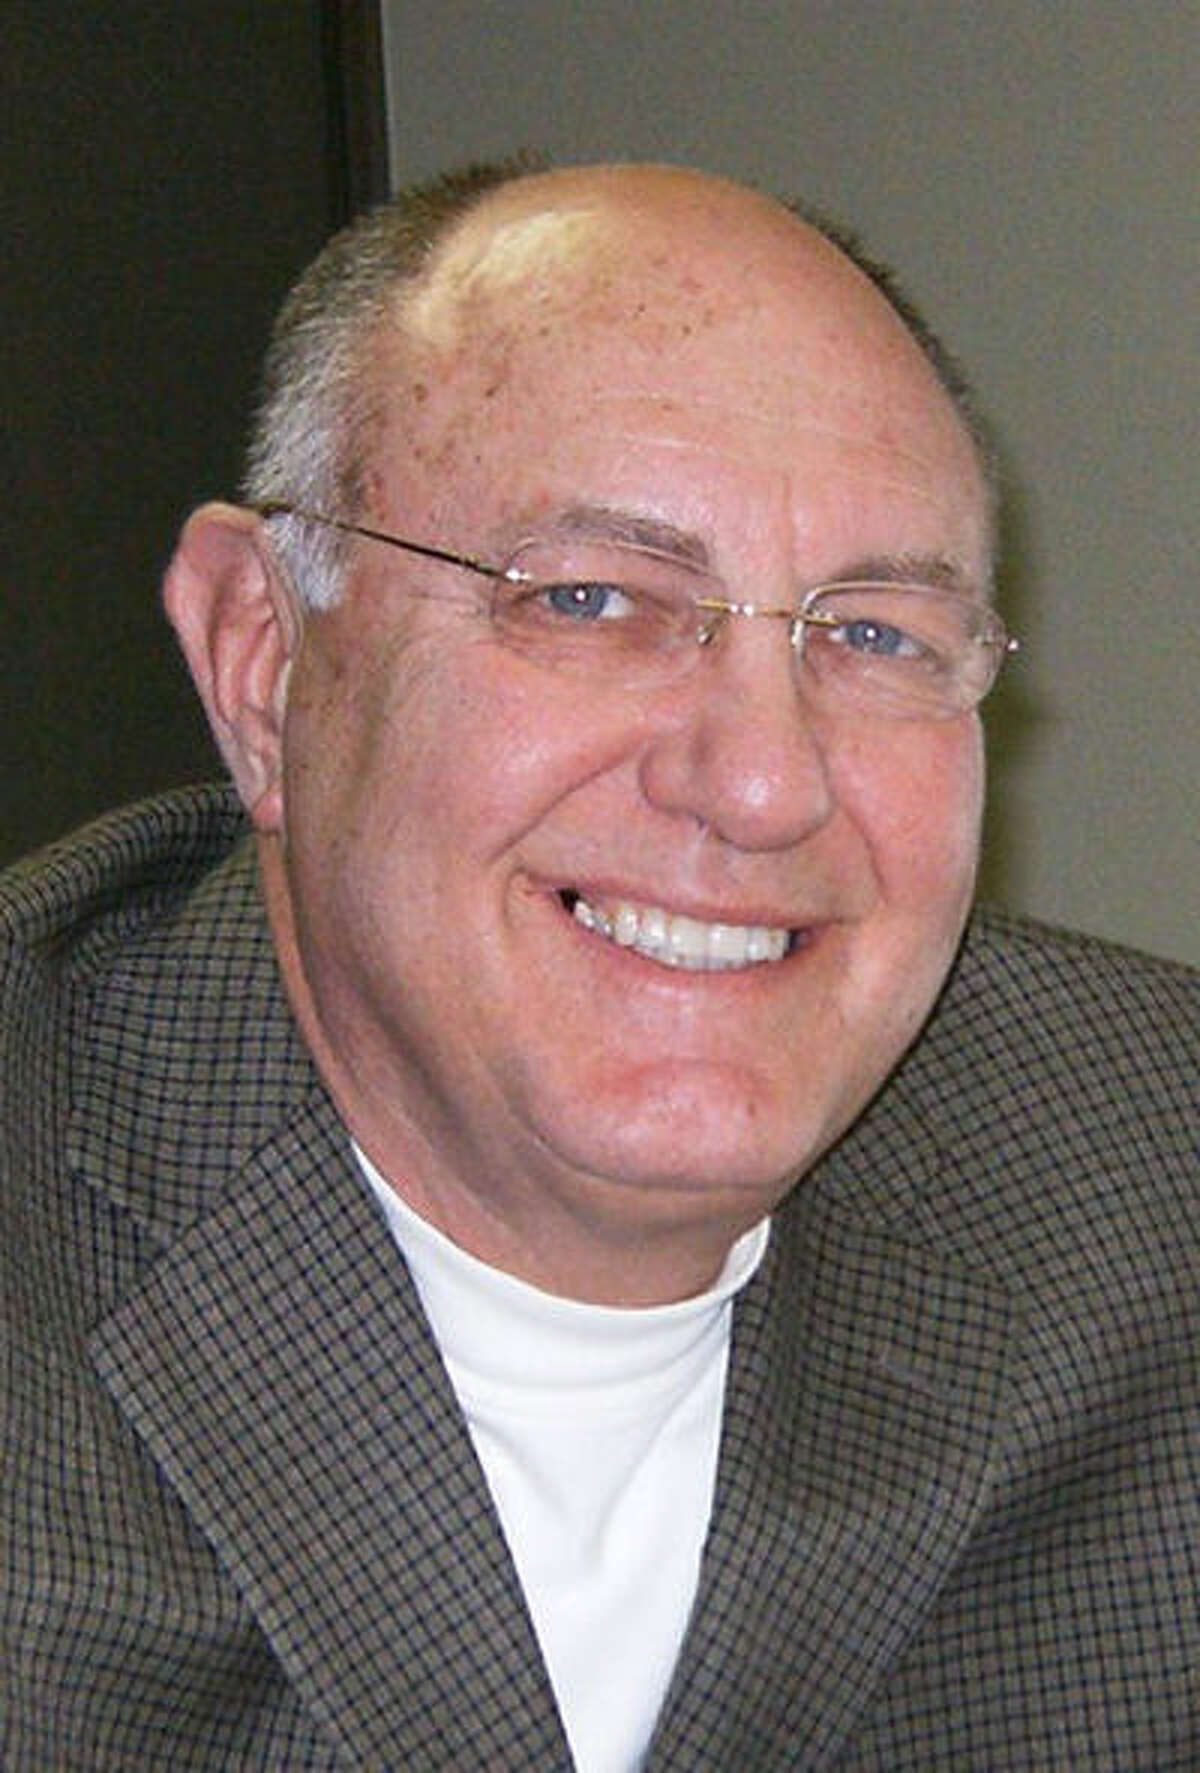 Charles Price became director of missions for the San Antonio Baptist Association in 2000.